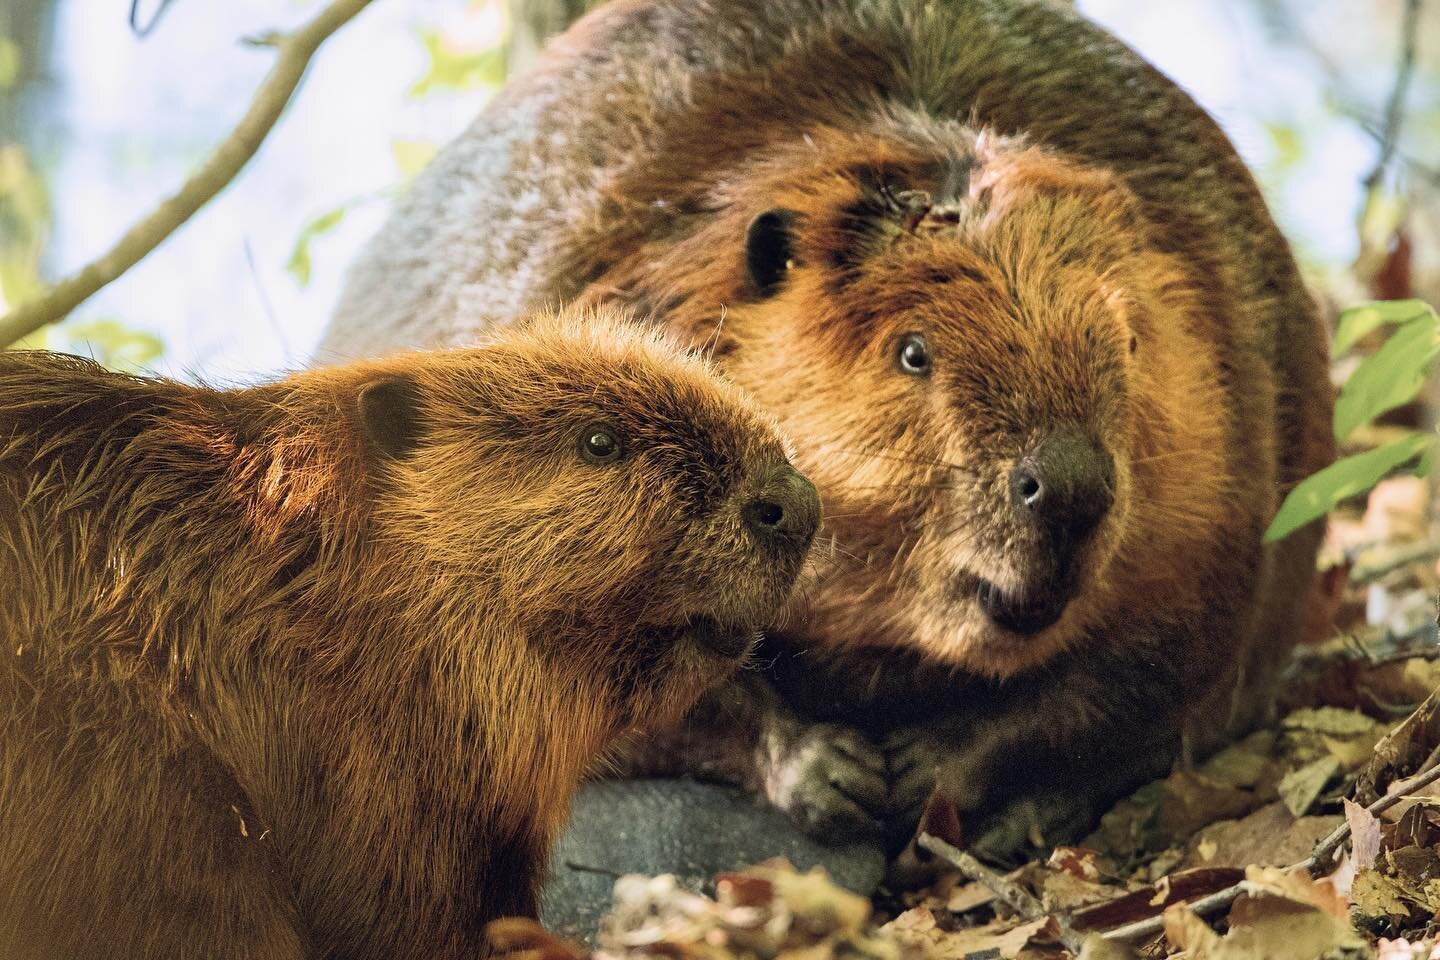 SWIPE 👉🏼 for a close up!

ro&bull;tund 
/rōˈtənd/

adjective 

1. plump, round or spherical 

Example: An absolute unit of a mother beaver and her rotund child.

#bigbeaverenergy #conservationphotography #climatechange #beaver #wildlifephotography 